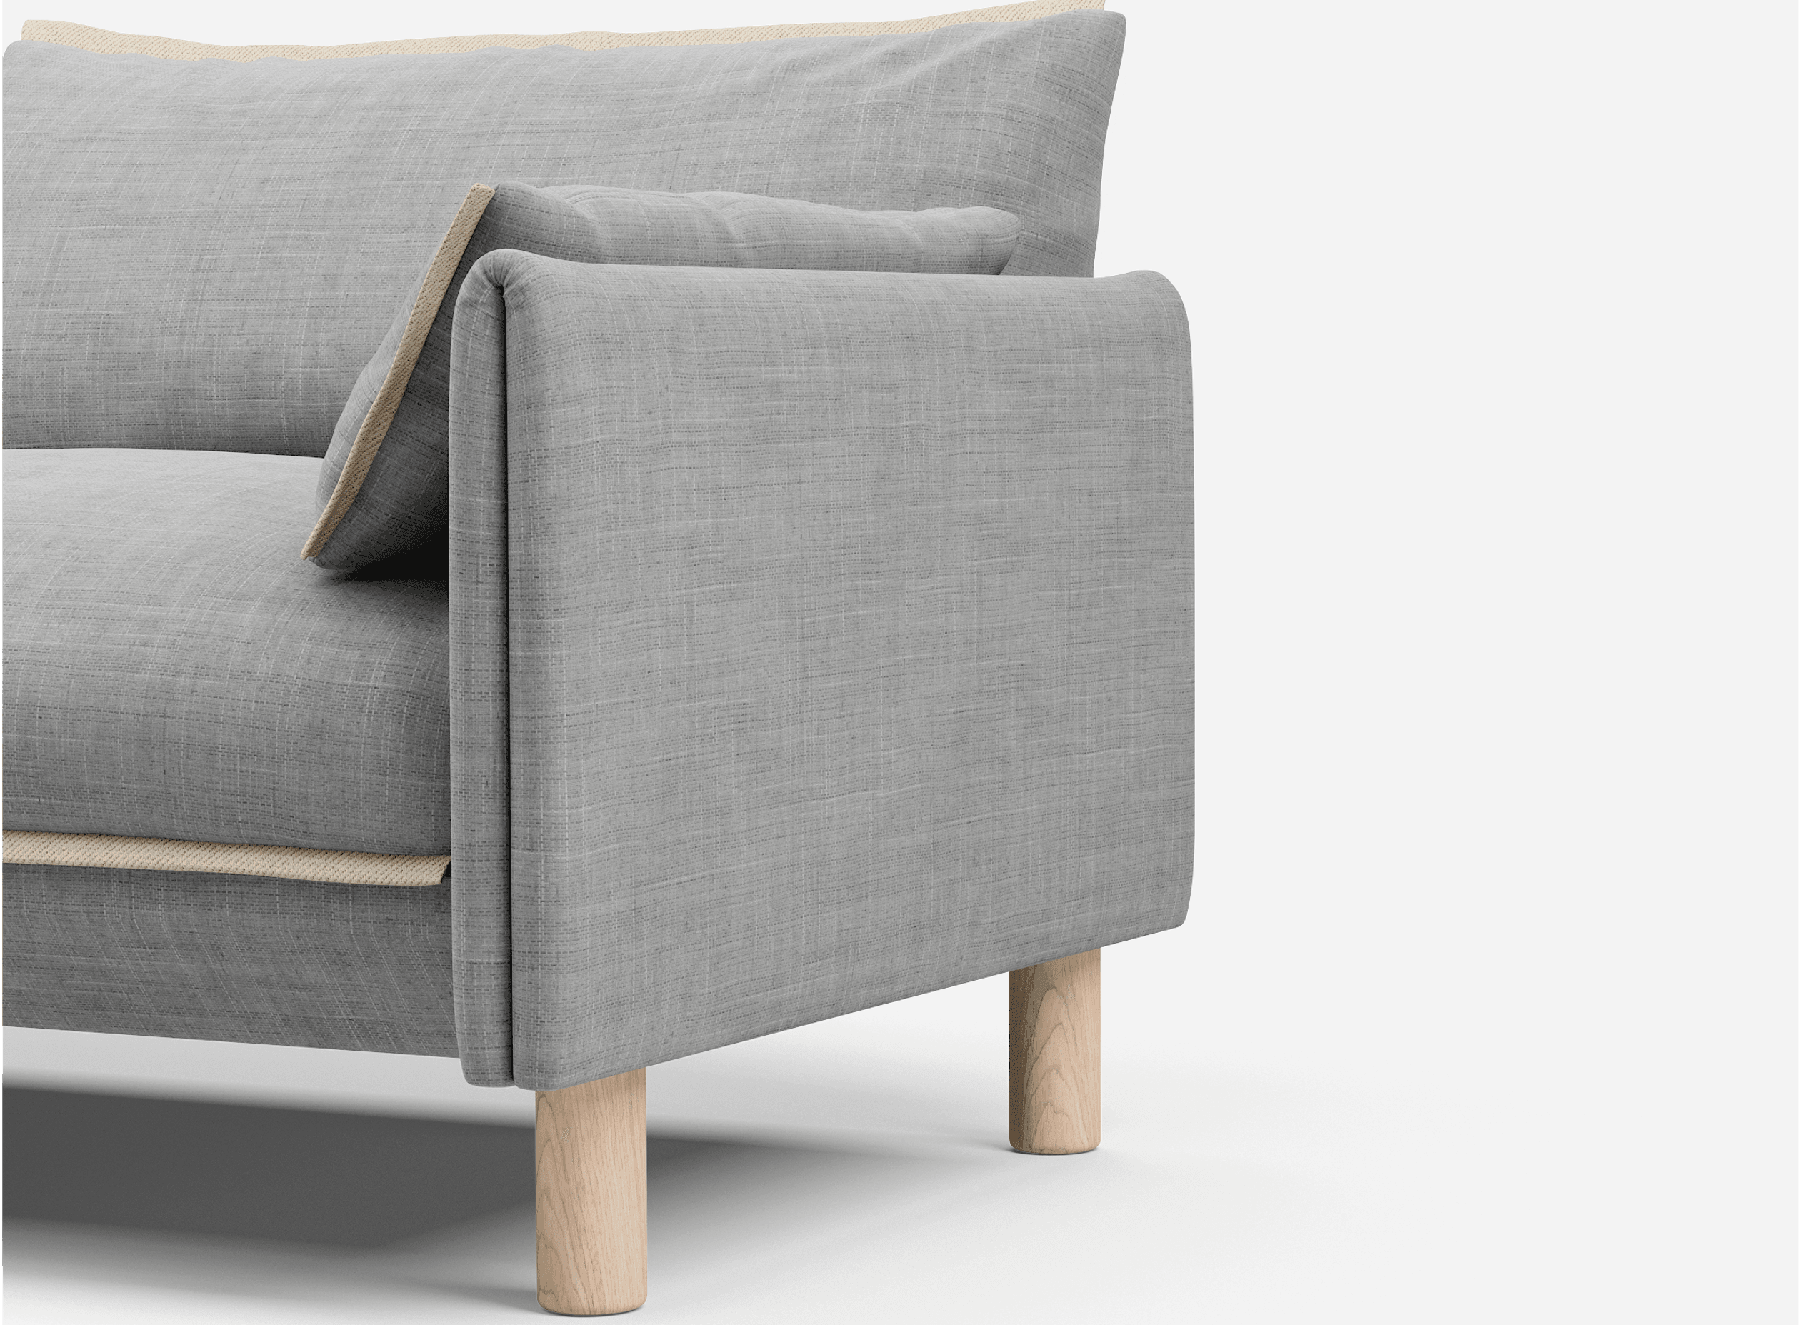 1 seater cozmo sofa Weave light gray with weave light gray jacket front angled view @ Light Grey Weave Jacket | Natural Trim